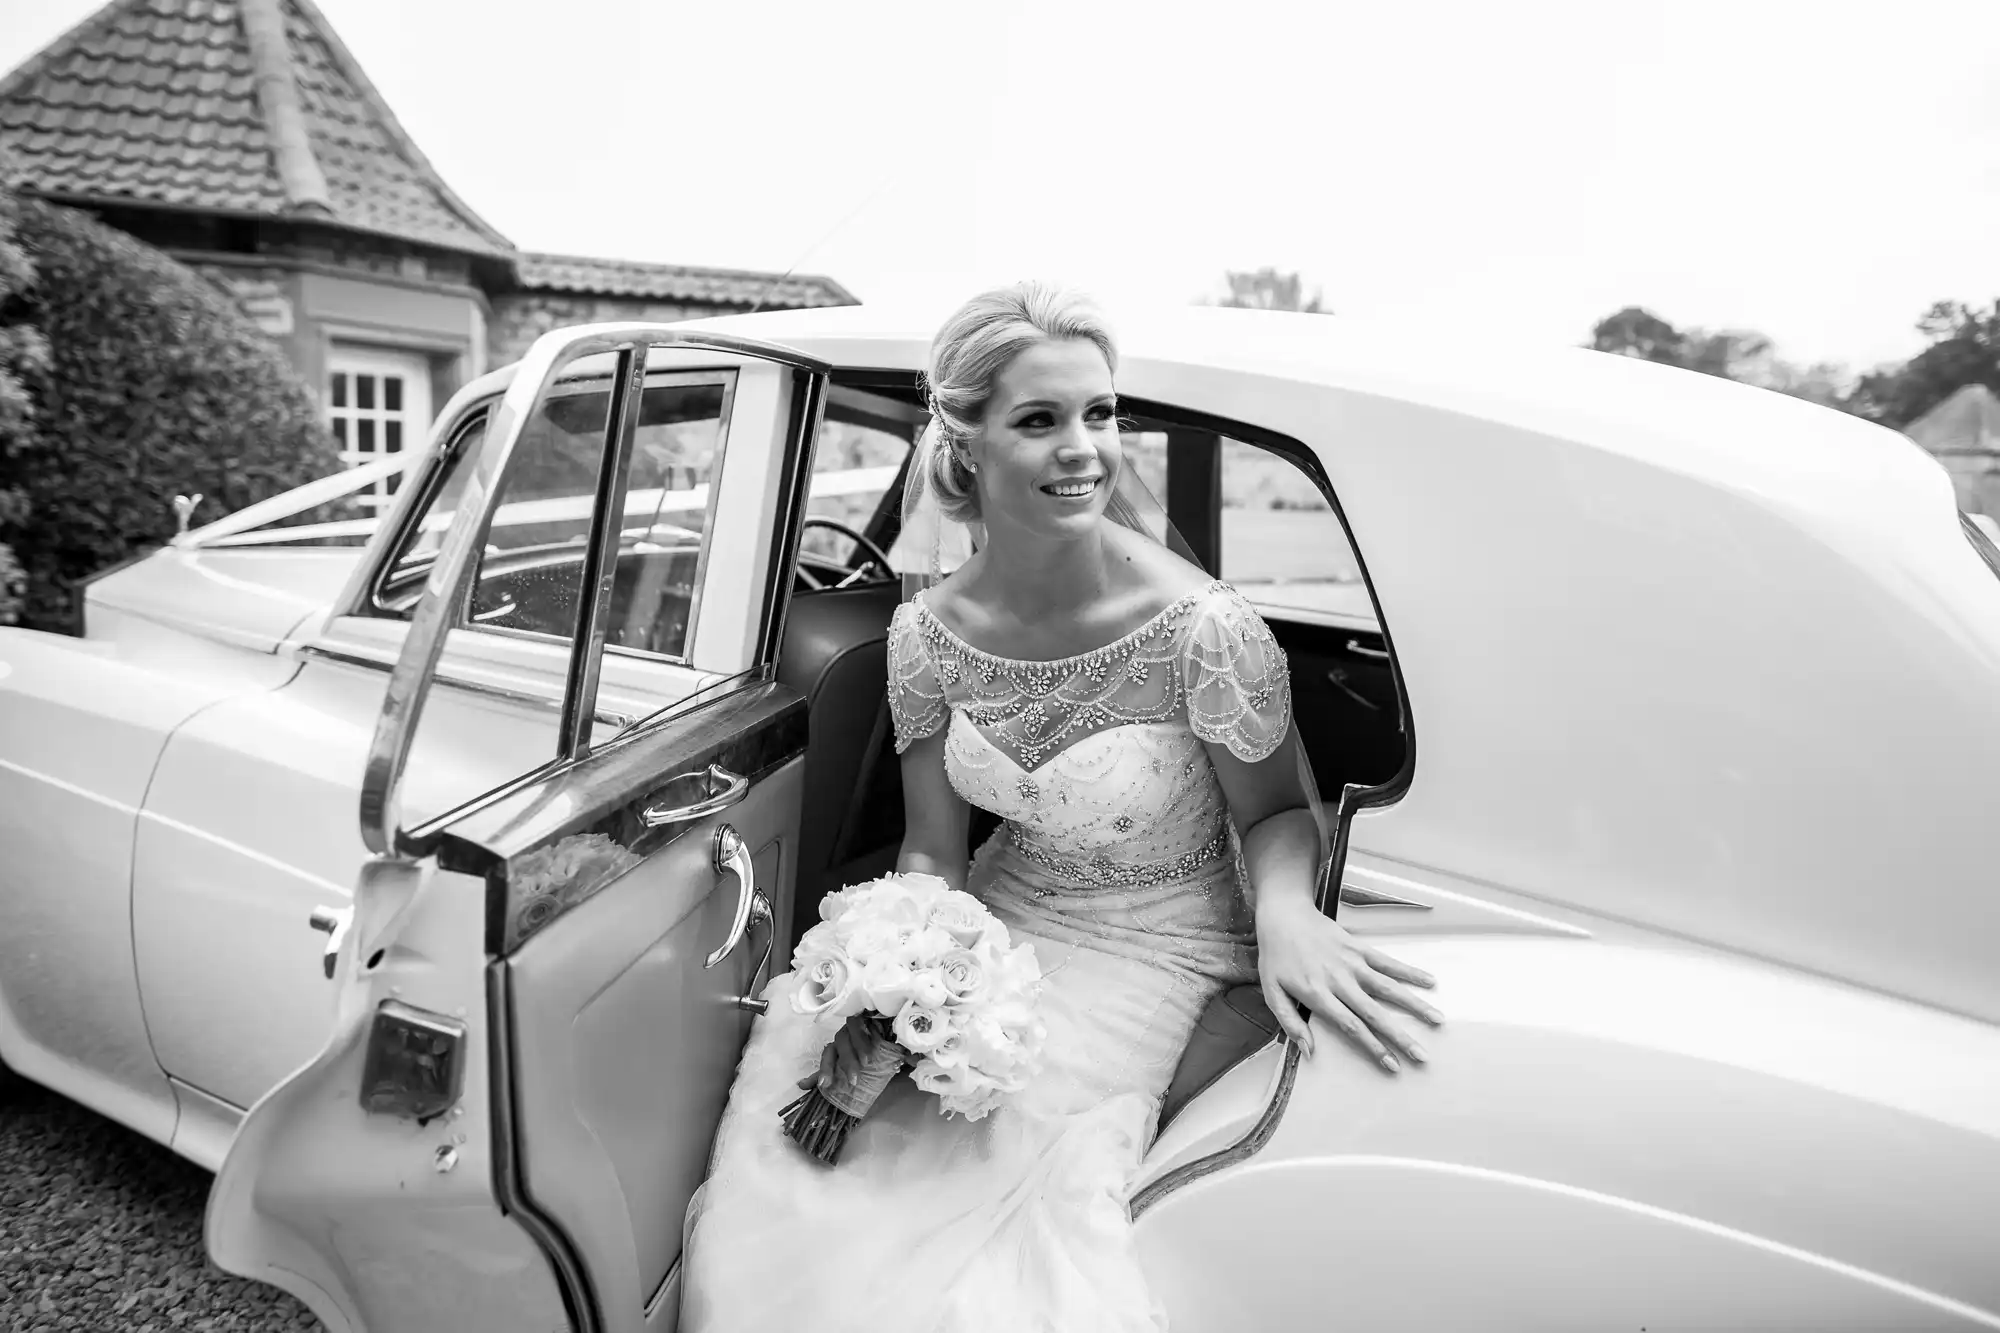 A bride wearing a lace wedding gown and holding a bouquet of flowers steps out of a vintage car on her wedding day.